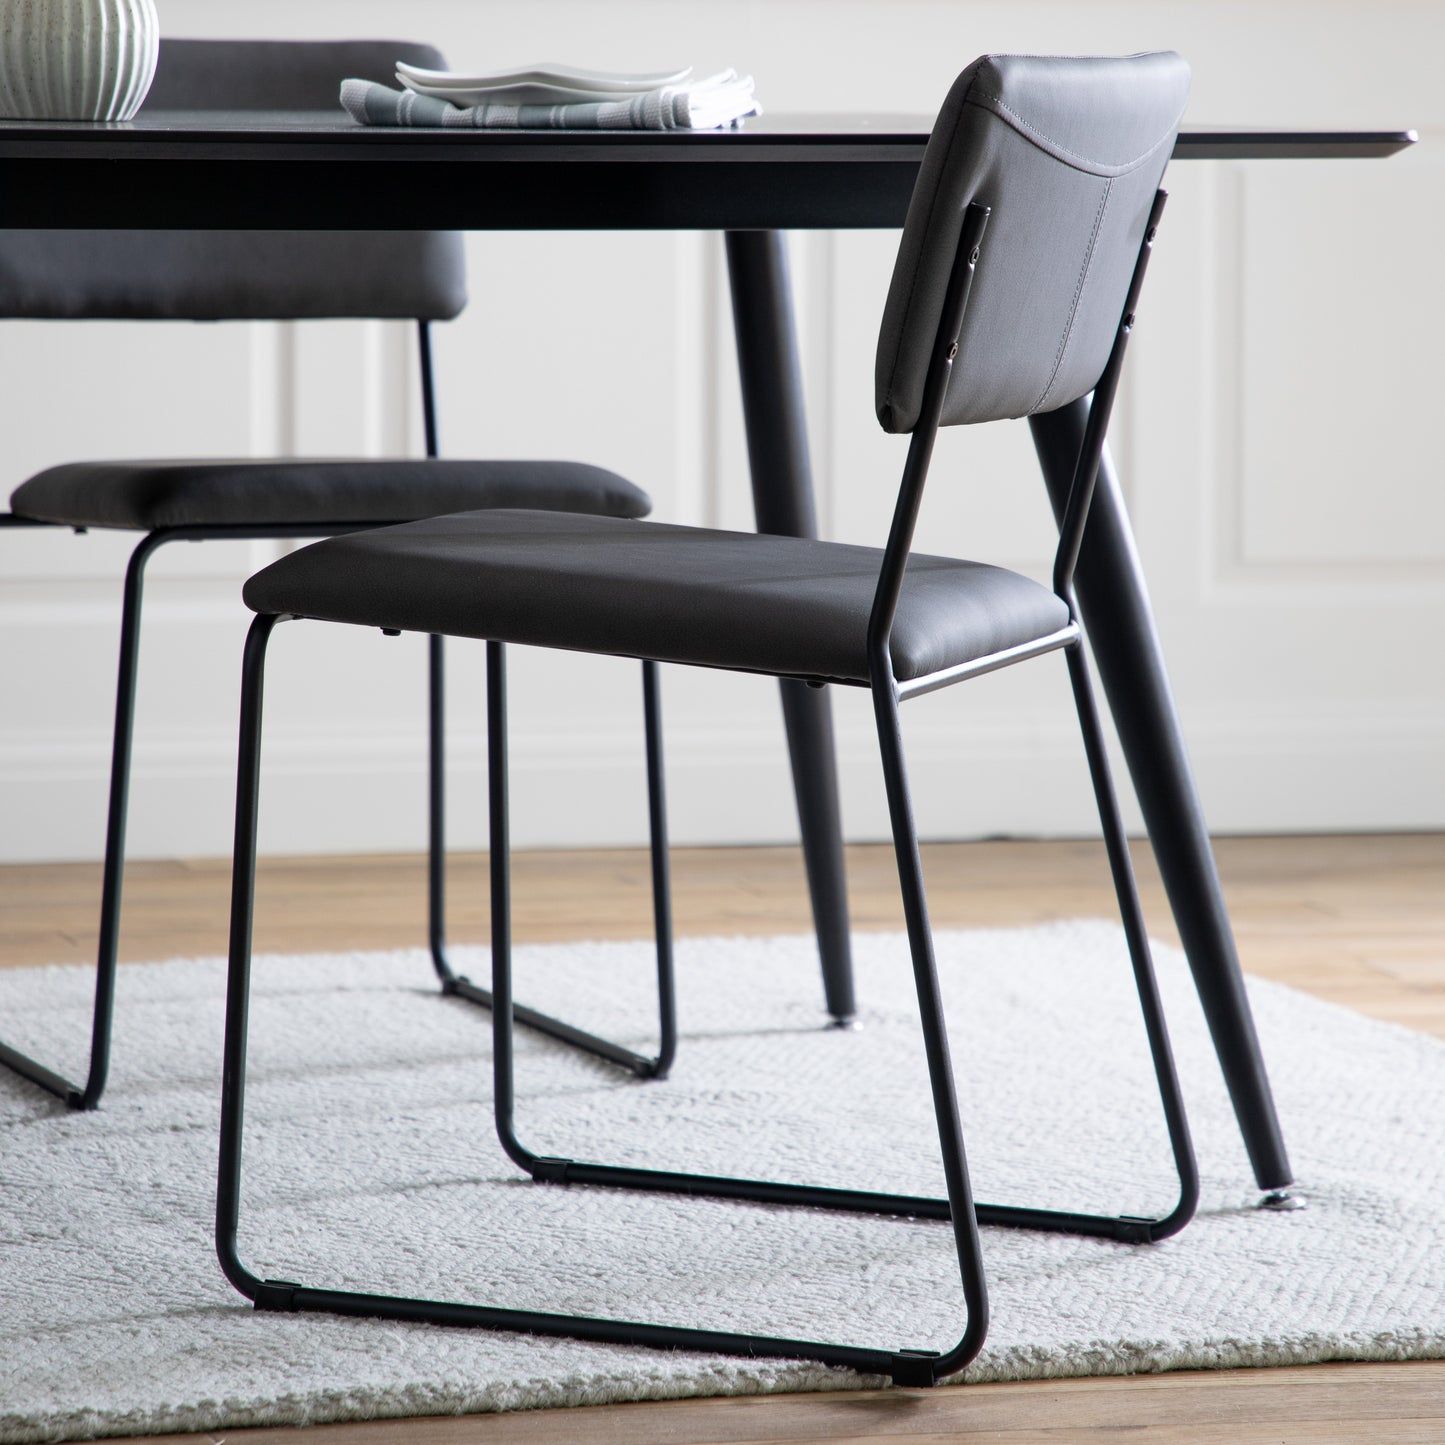 A Chivelstone Dining Chair Slate Grey (2pk) with two chairs and a black table for interior decor from Kikiathome.co.uk.